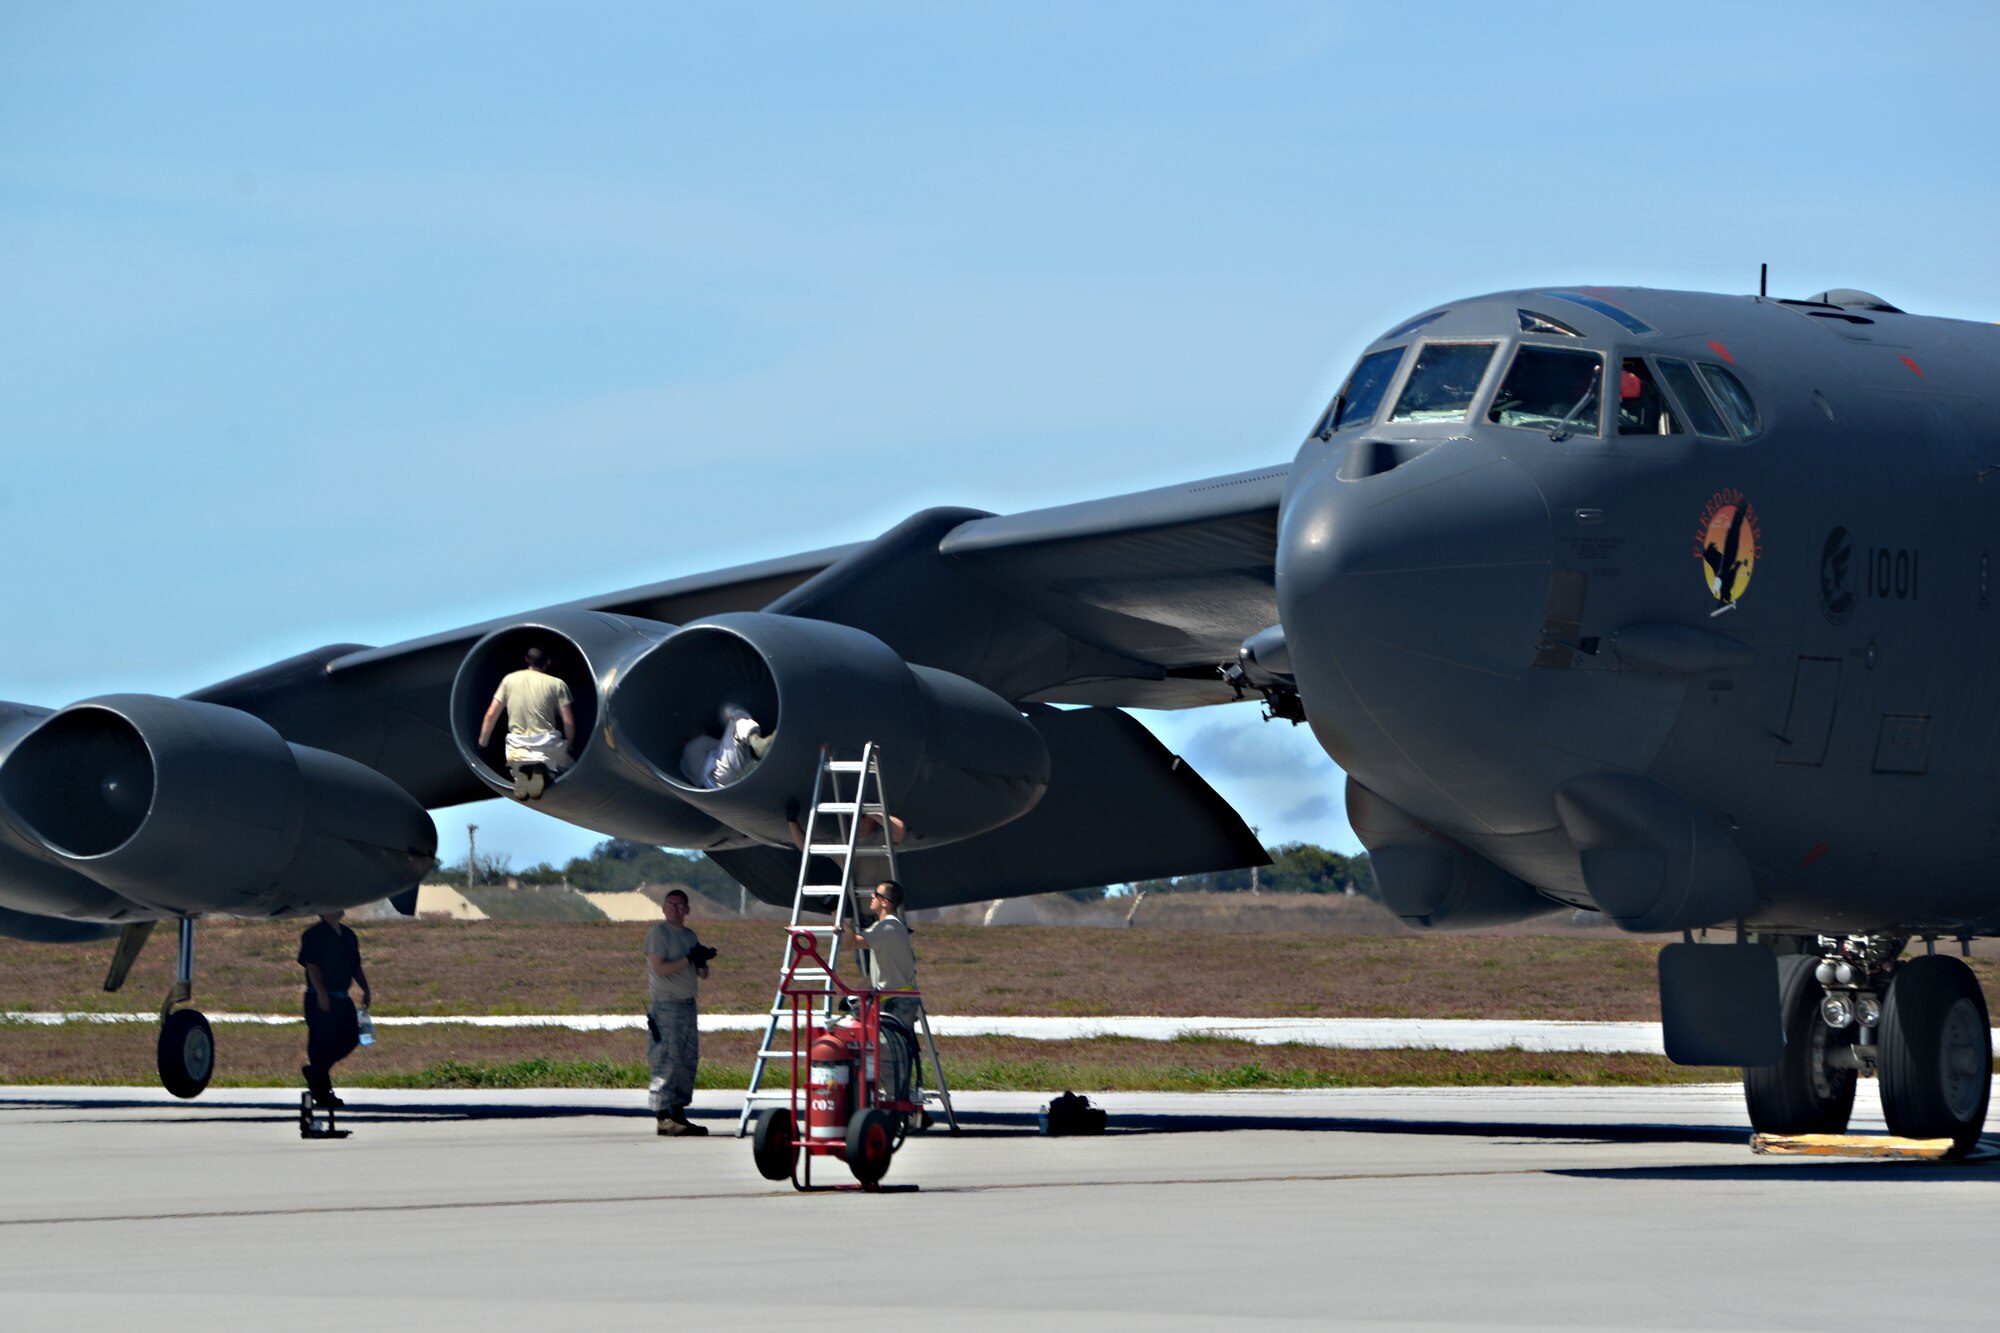 Members of the 36th Expeditionary Aircraft Maintenance Squadron conduct a post-flight inspection on a B-52 Stratofortress after its arrival June 2, 2016, at Andersen Air Force Base, Guam. The aircraft is deployed in support of U.S. Pacific Command’s Continuous Bomber Presence operations. These aircraft and the men and women who fly and support them provide a significant capability that enables U.S. readiness and commitment to deterrence, provides assurances to allies, and strengthens regional security and stability in the Indo-Asia-Pacific region. (U.S. Air Force photo by Airman 1st Class Alexa Ann Henderson/Released)   